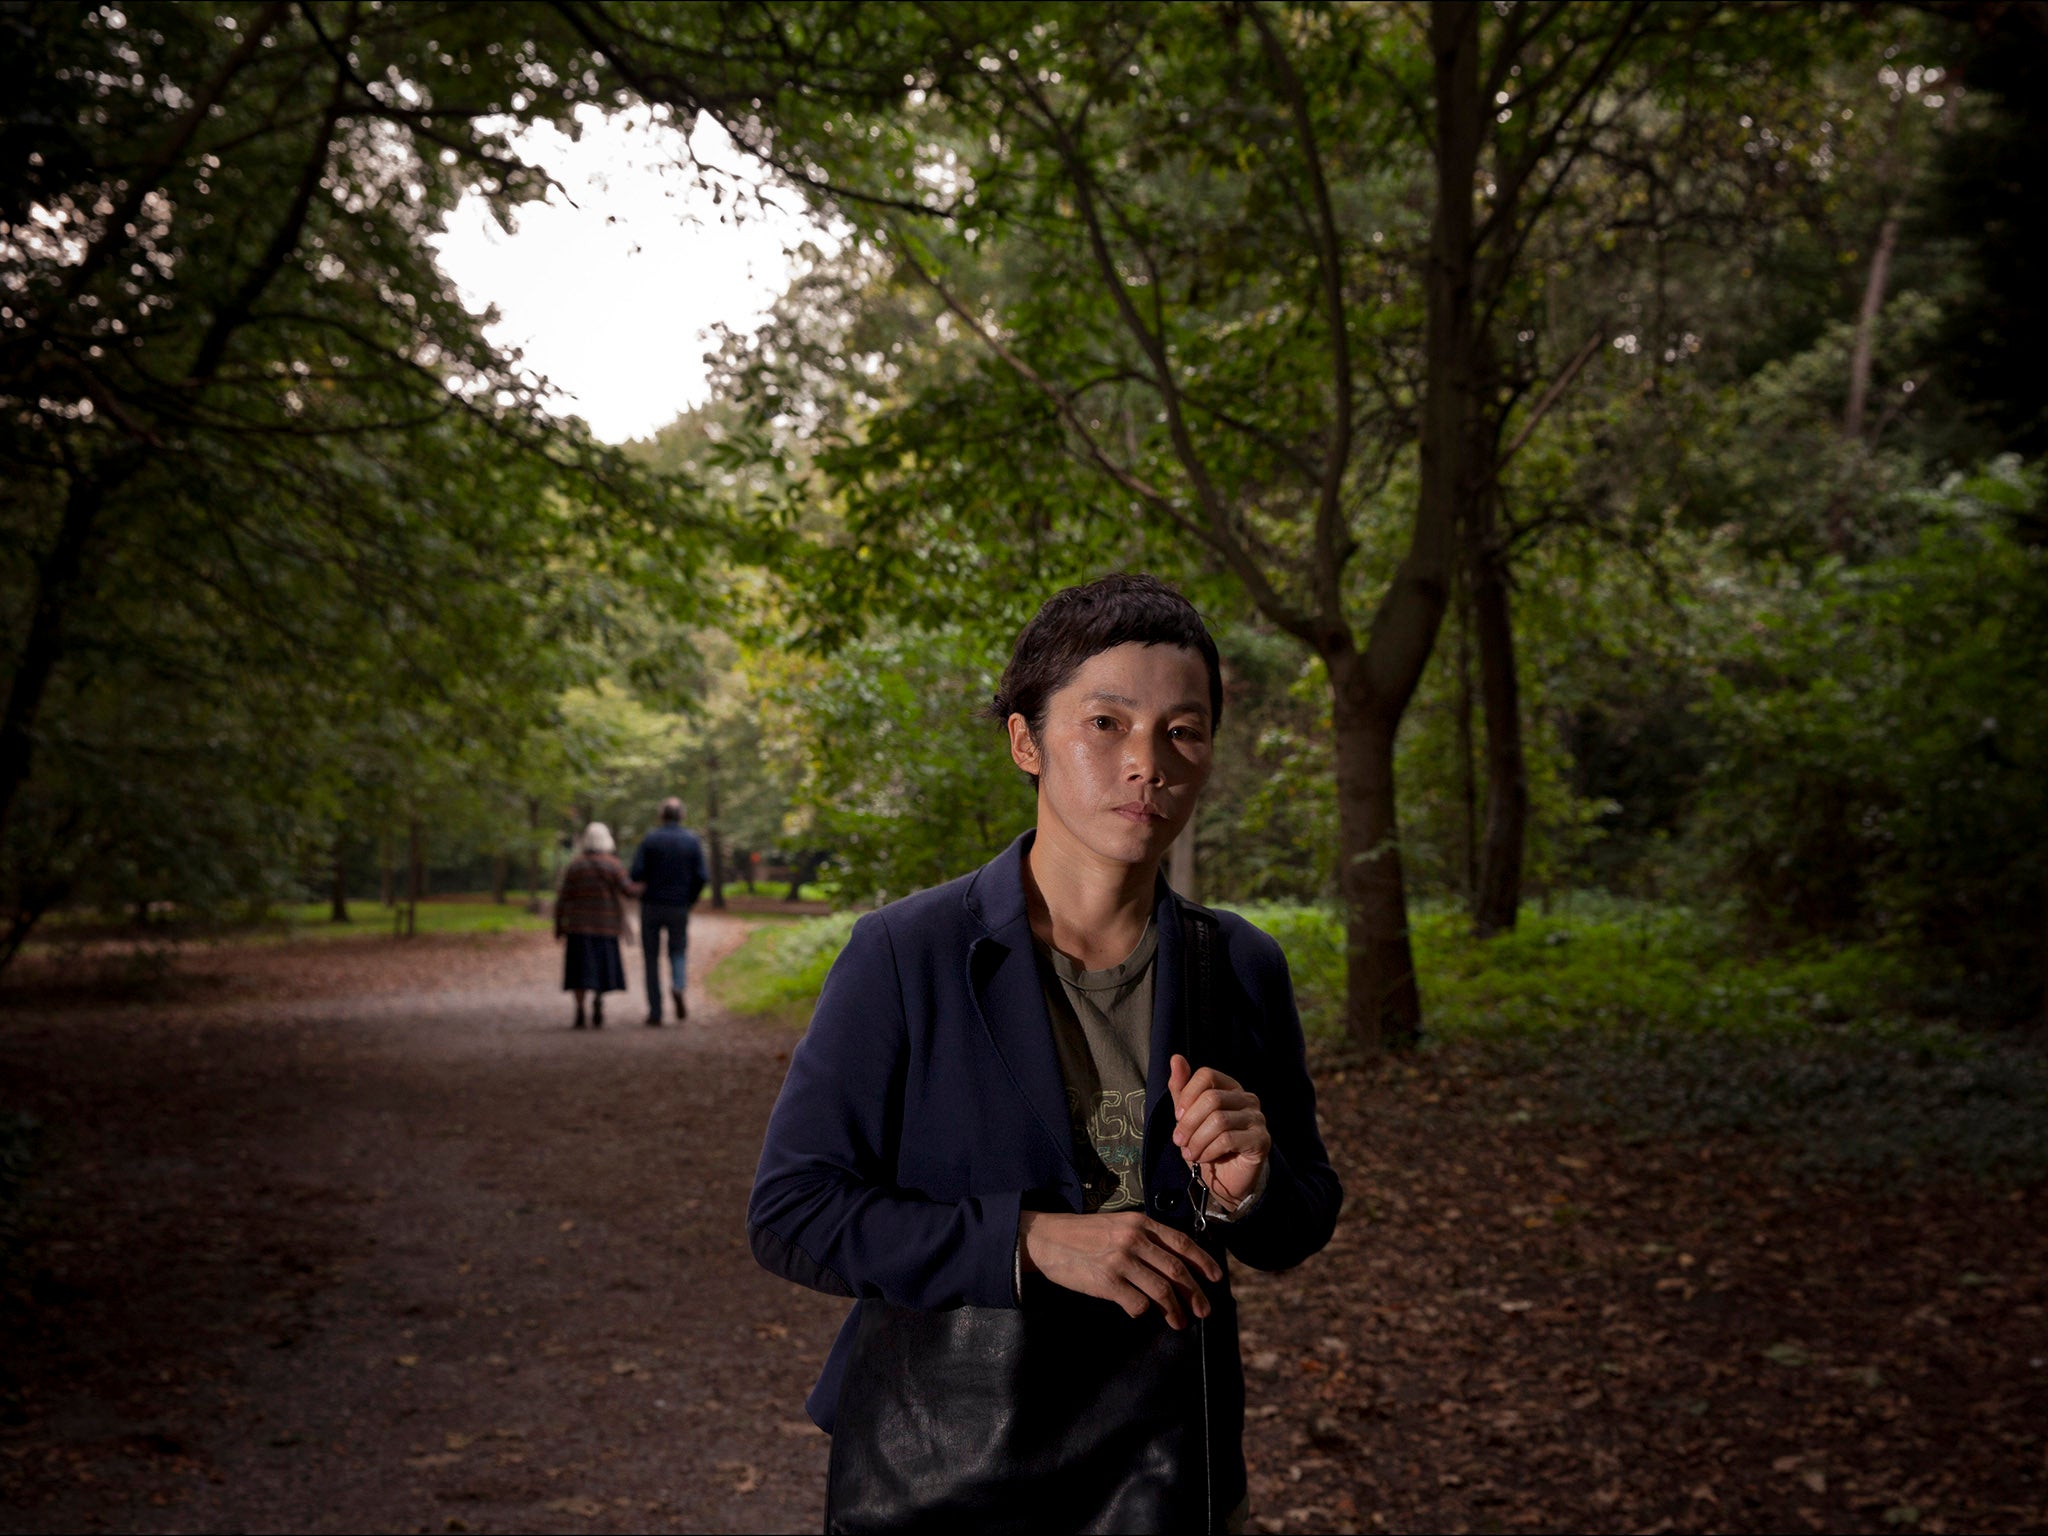 Koo Jeong A photographed in Holland Park in London